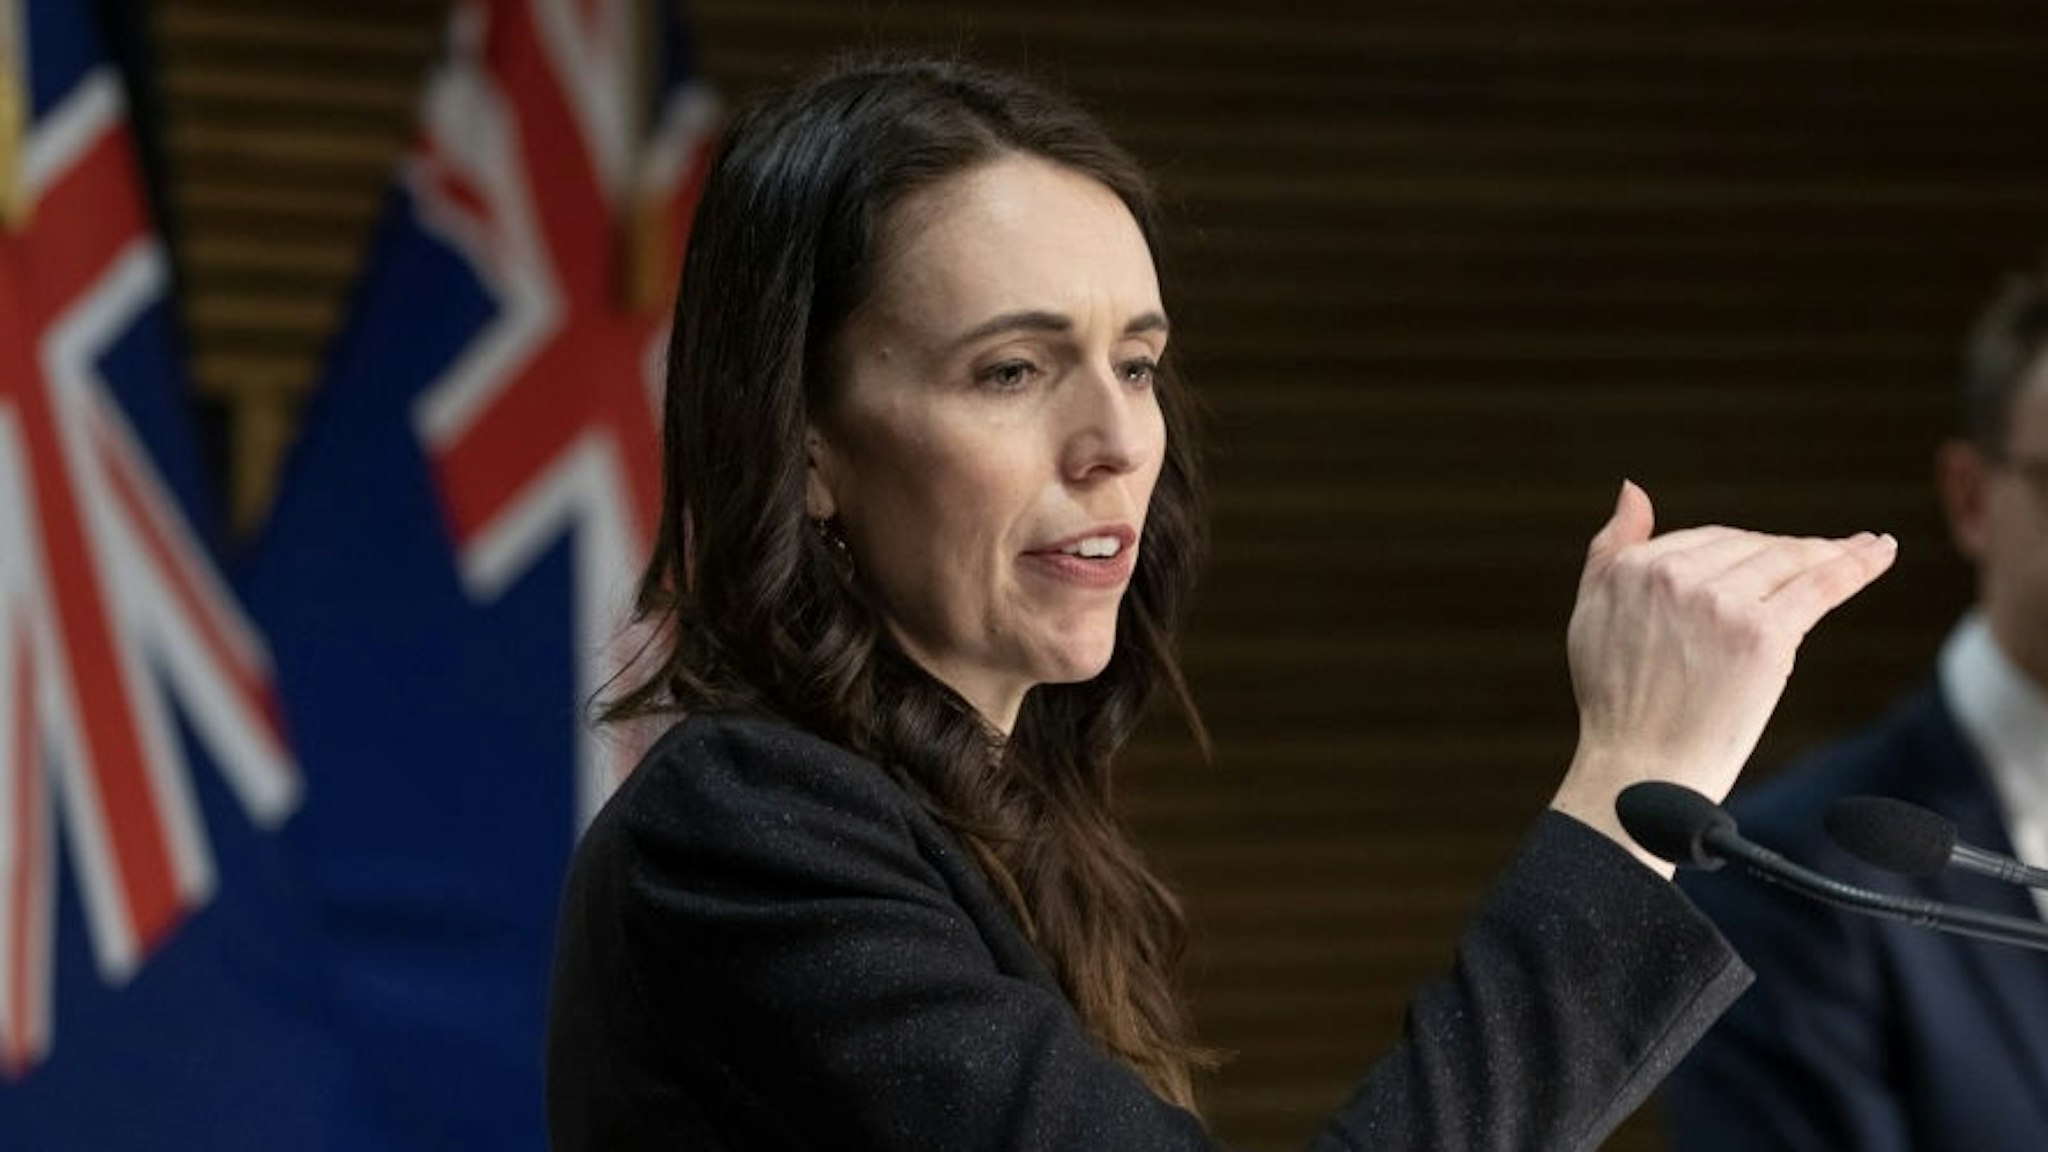 Prime Minister Jacinda Ardern Gives COVID-19 Update And Announces Home Isolation Pilot WELLINGTON, NEW ZEALAND - SEPTEMBER 27: Prime Minister Jacinda Ardern during her post-Cabinet press conference with Director General of Health Dr Ashley Bloomfield at Parliament on September 27, 2021 in Wellington, New Zealand. Prime Minister Jacinda Ardern has announced New Zealand will run a pilot program for small group of people travel overseas and self-isolate at home instead of hotel quarantine on their return to New Zealand (Photo by Mark Mitchell - Pool/Getty Images) Pool / Pool